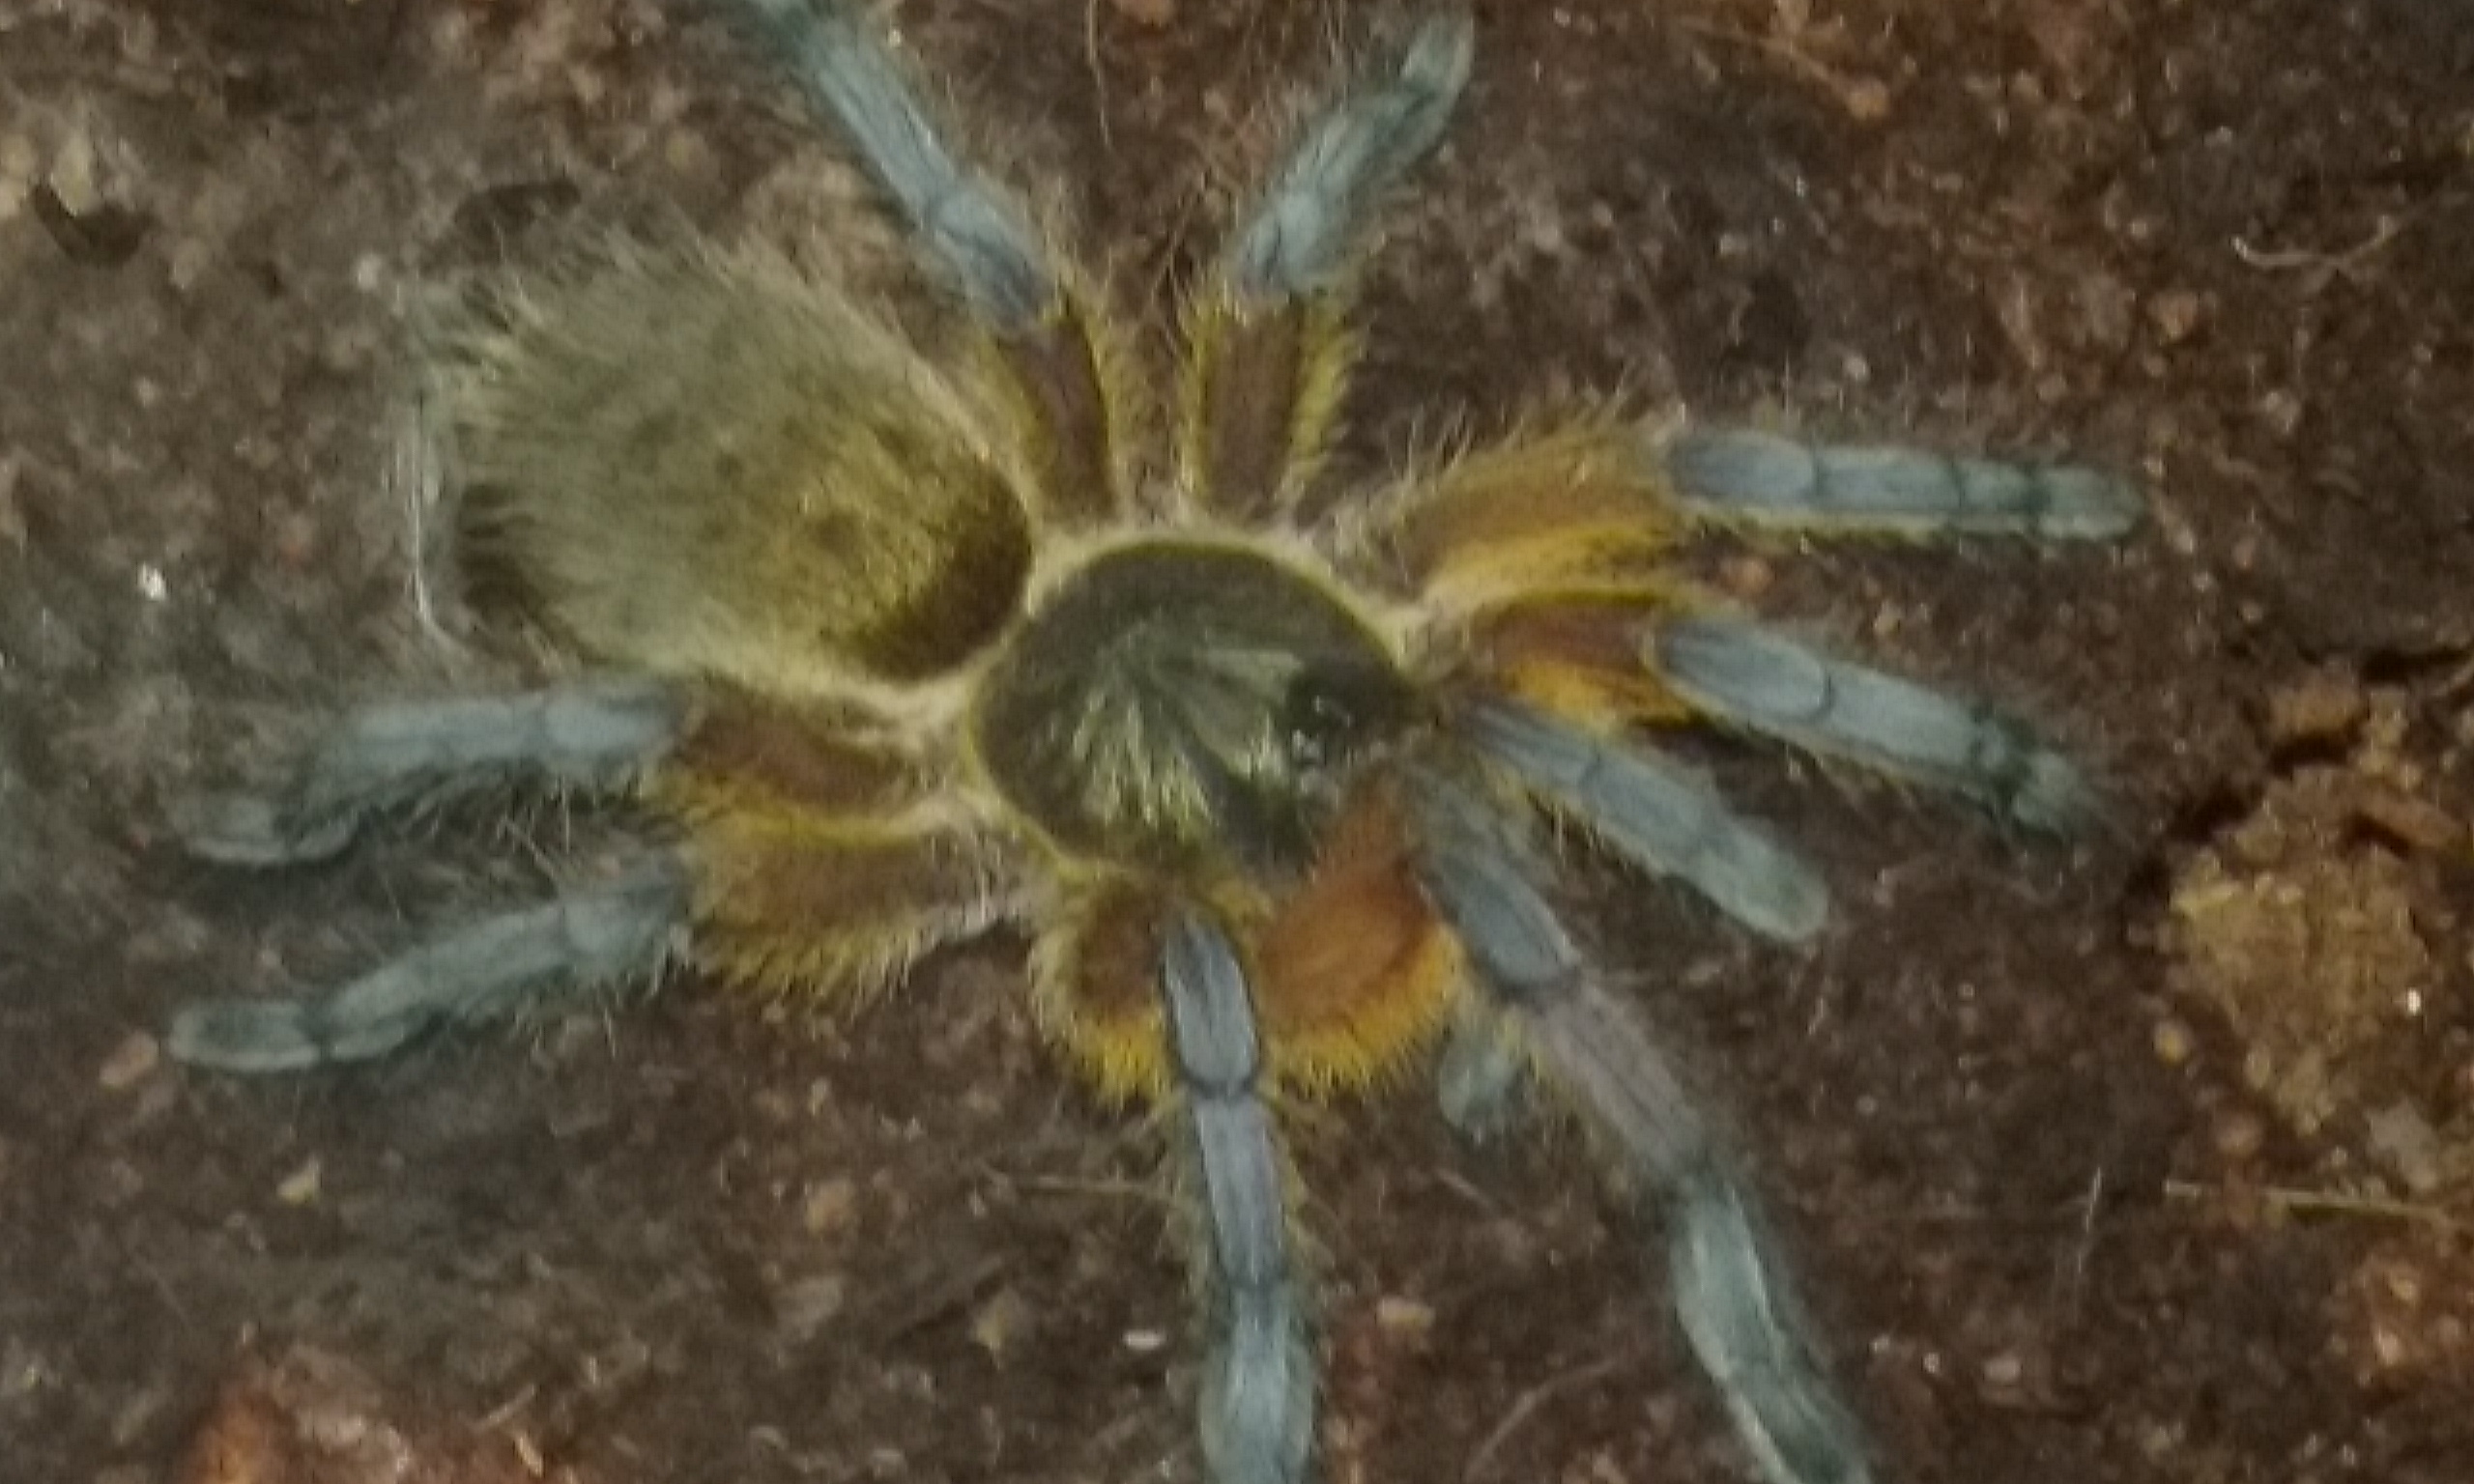 The lesser spotted Harpactira pulchripes